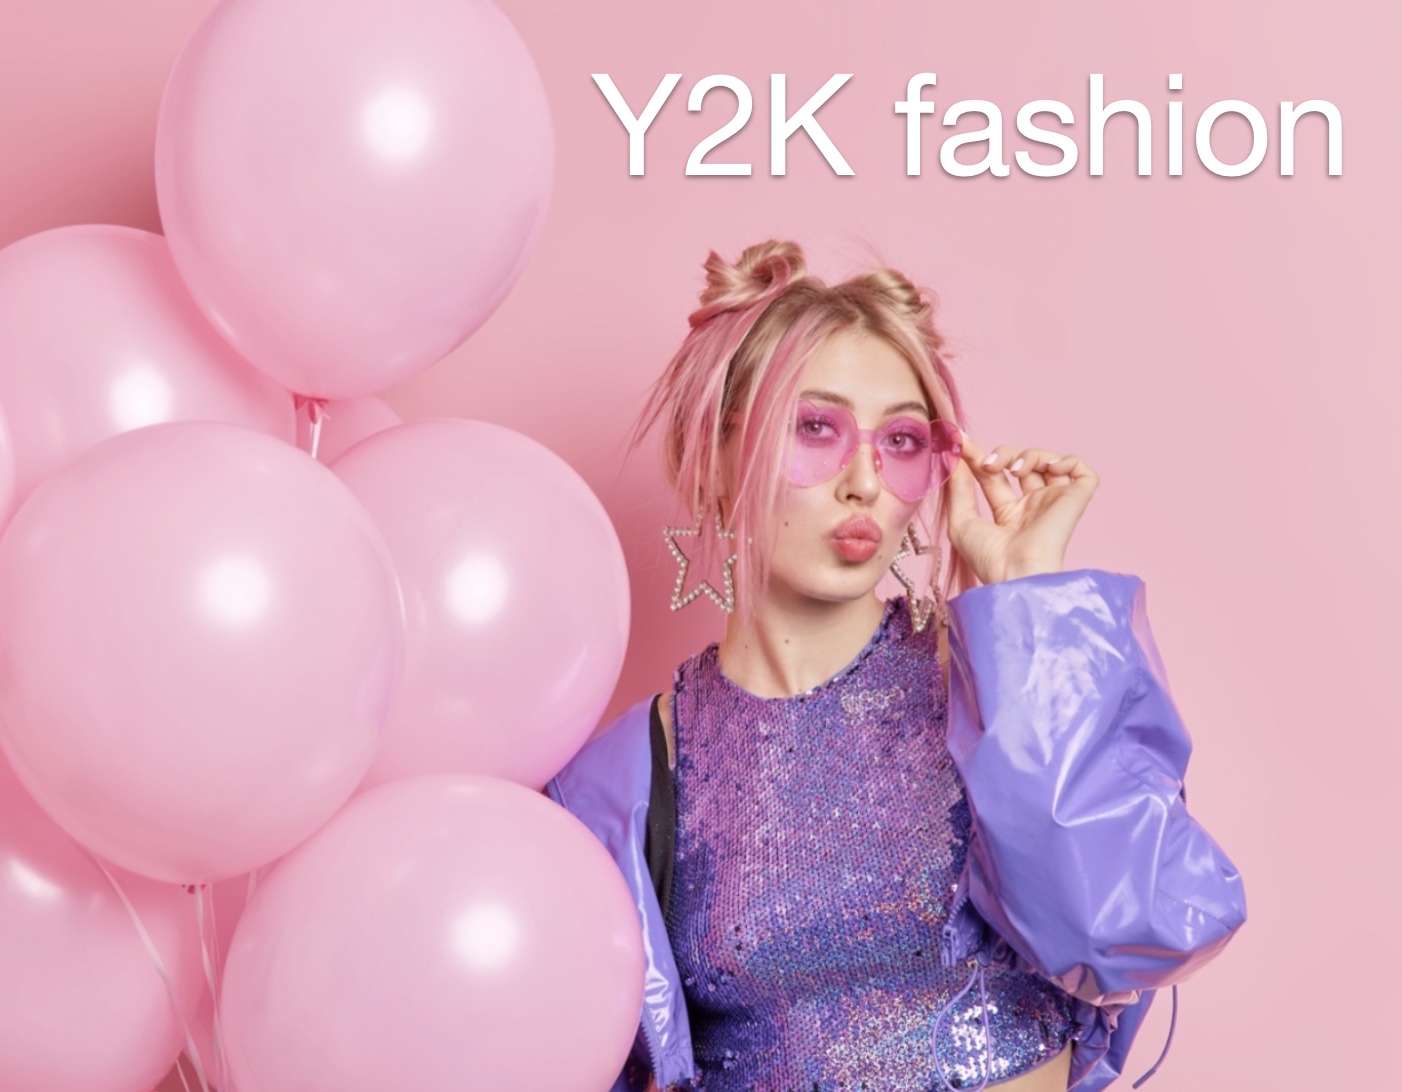 Y2K fashion what is it and why is it so popular amongst men & women